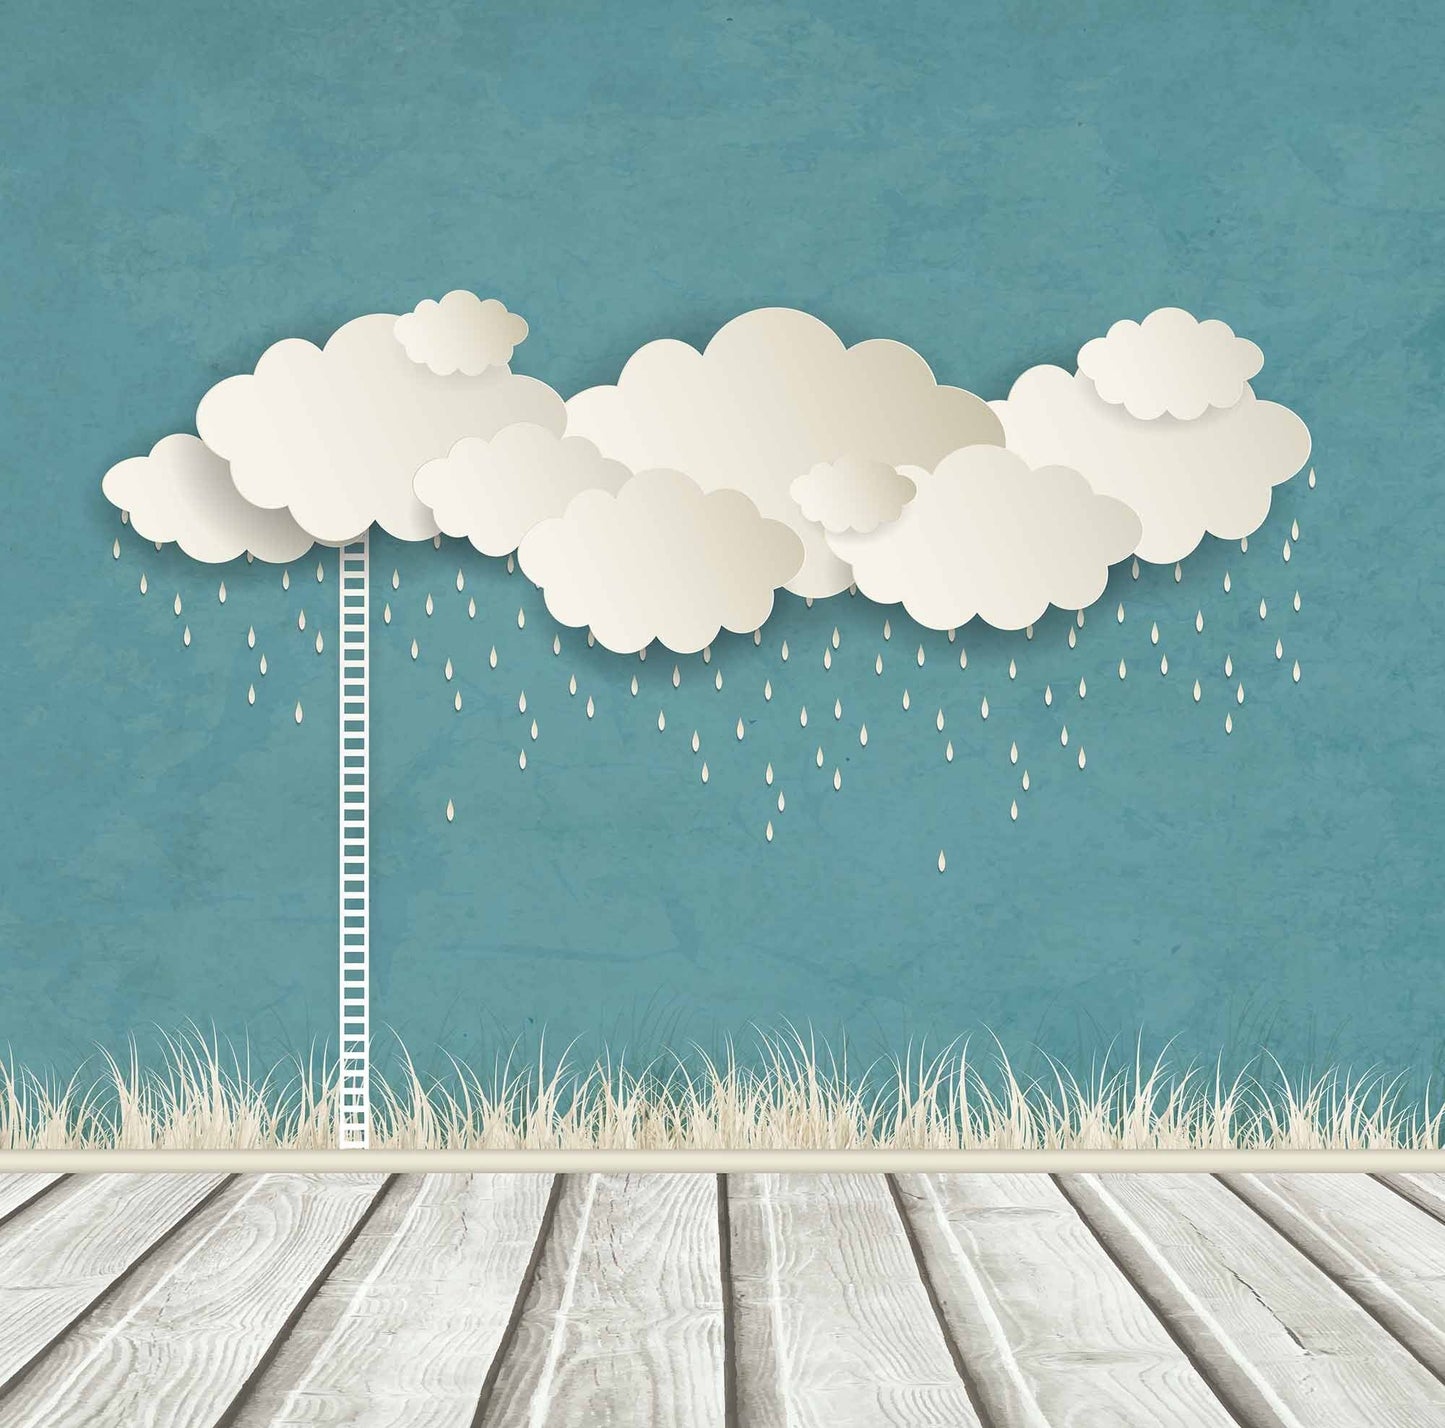 Rain Cloud And Ladder In Pale Blue Background With Wood Floor For Baby Backdrop Shopbackdrop